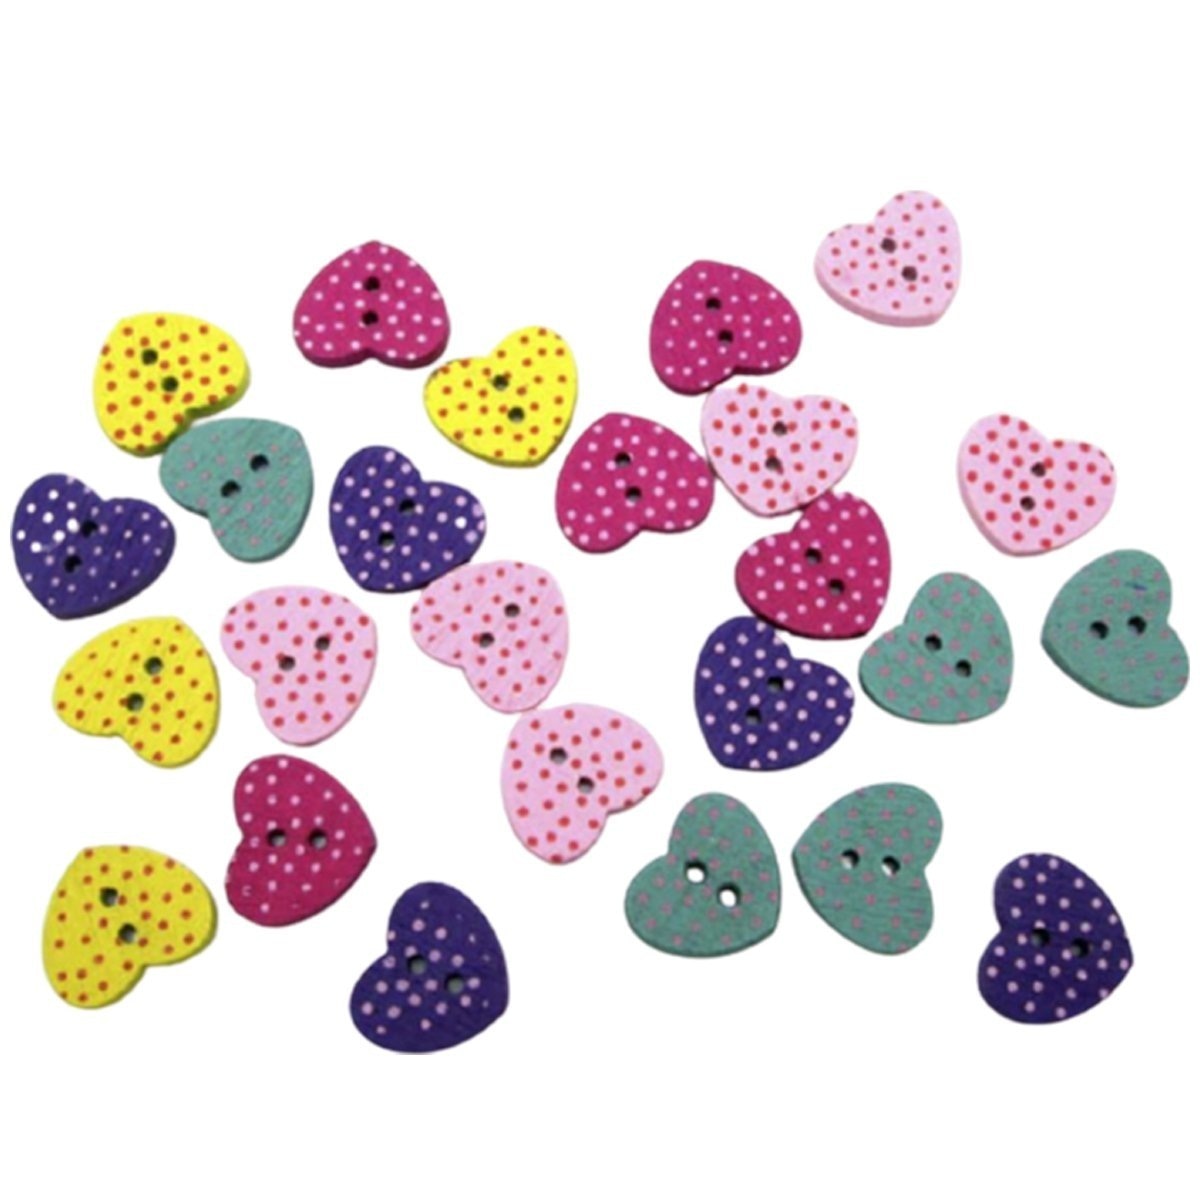 50pcs Mixed Heart Wood Buttons Sewing Buttons For Kids Clothes DIY